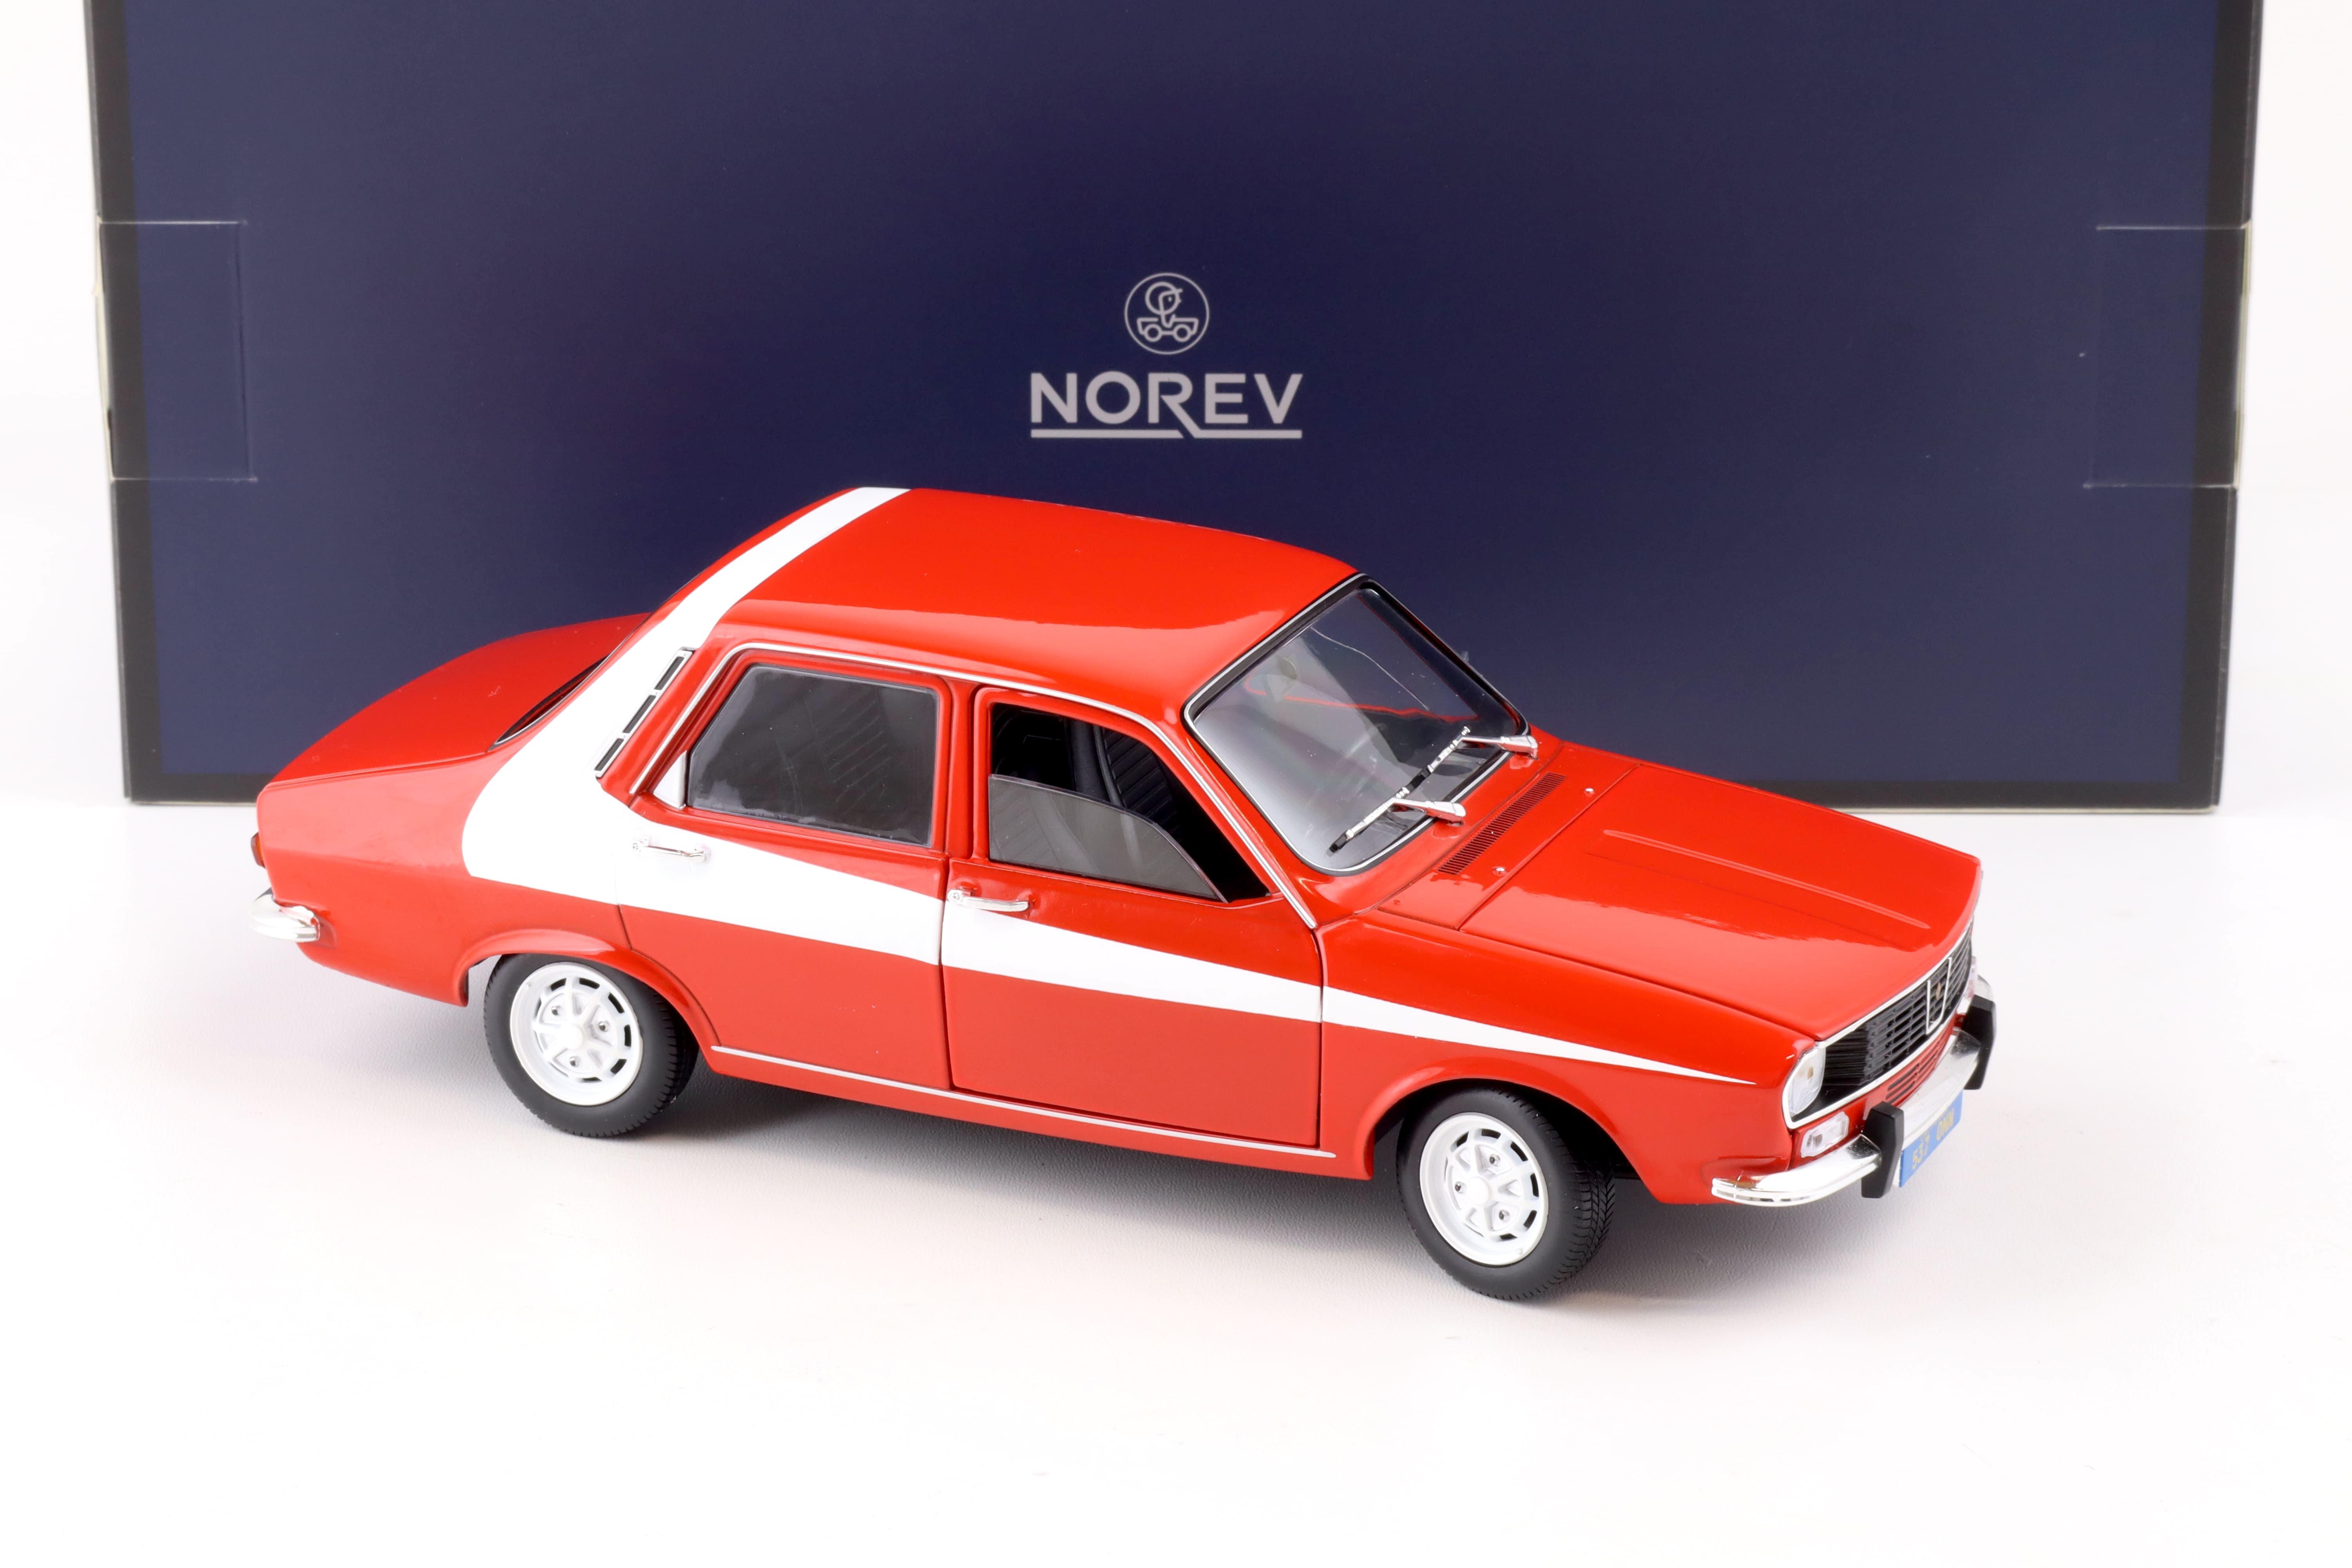 1:18 Norev Renault 12 red with white side deco 1975 - Limited 300 pcs.